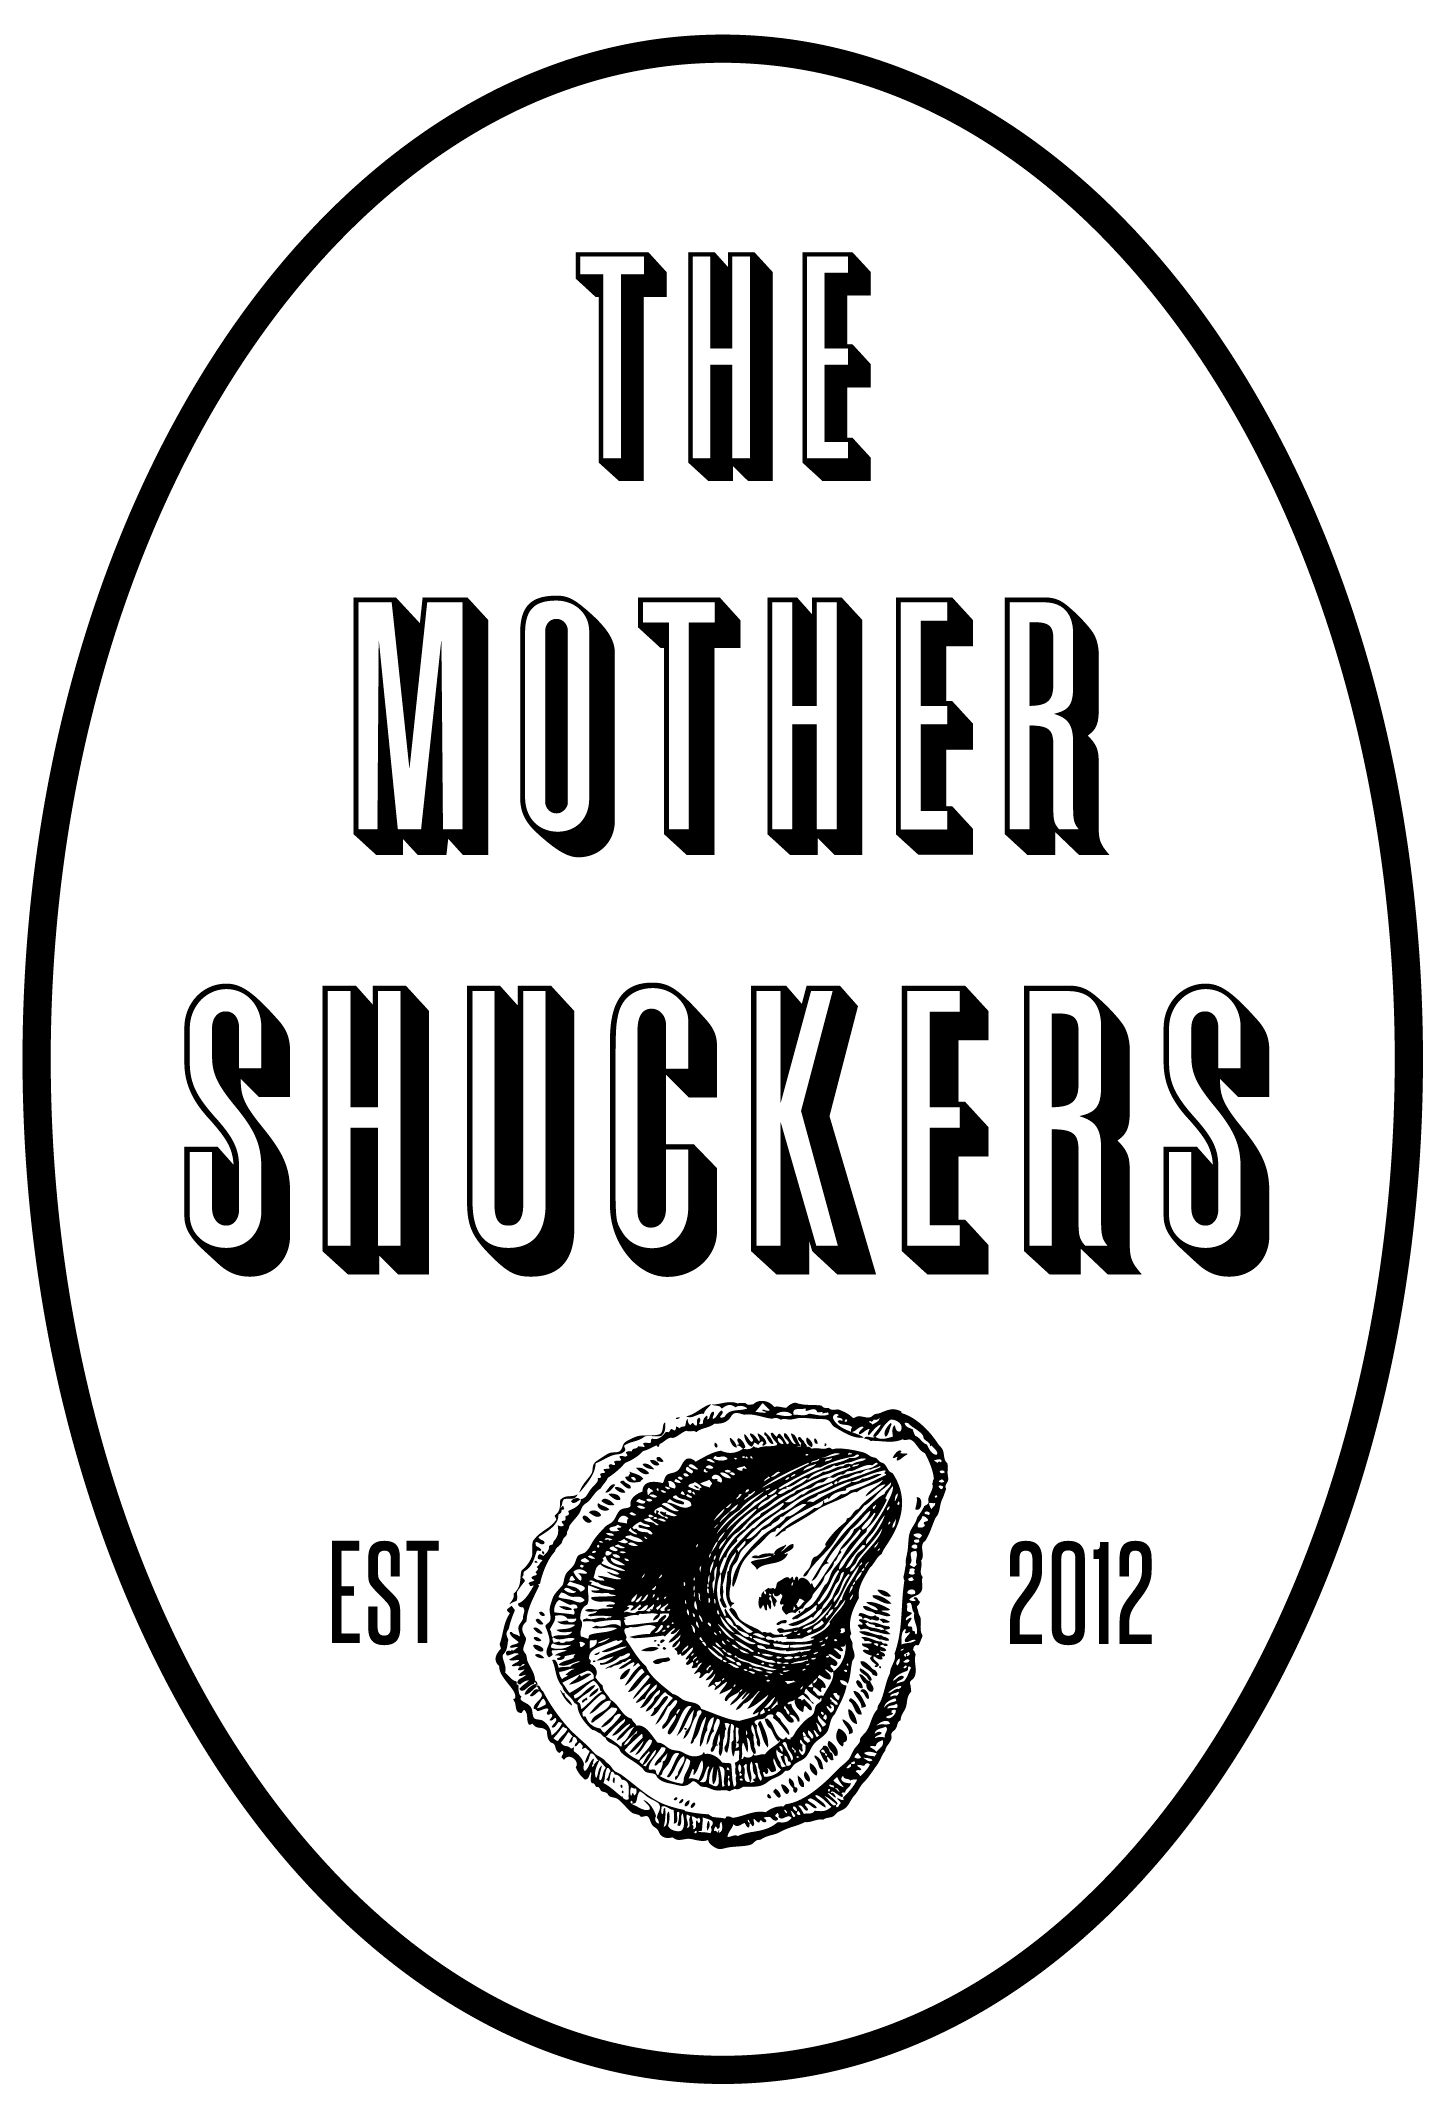 The Mother Shuckers